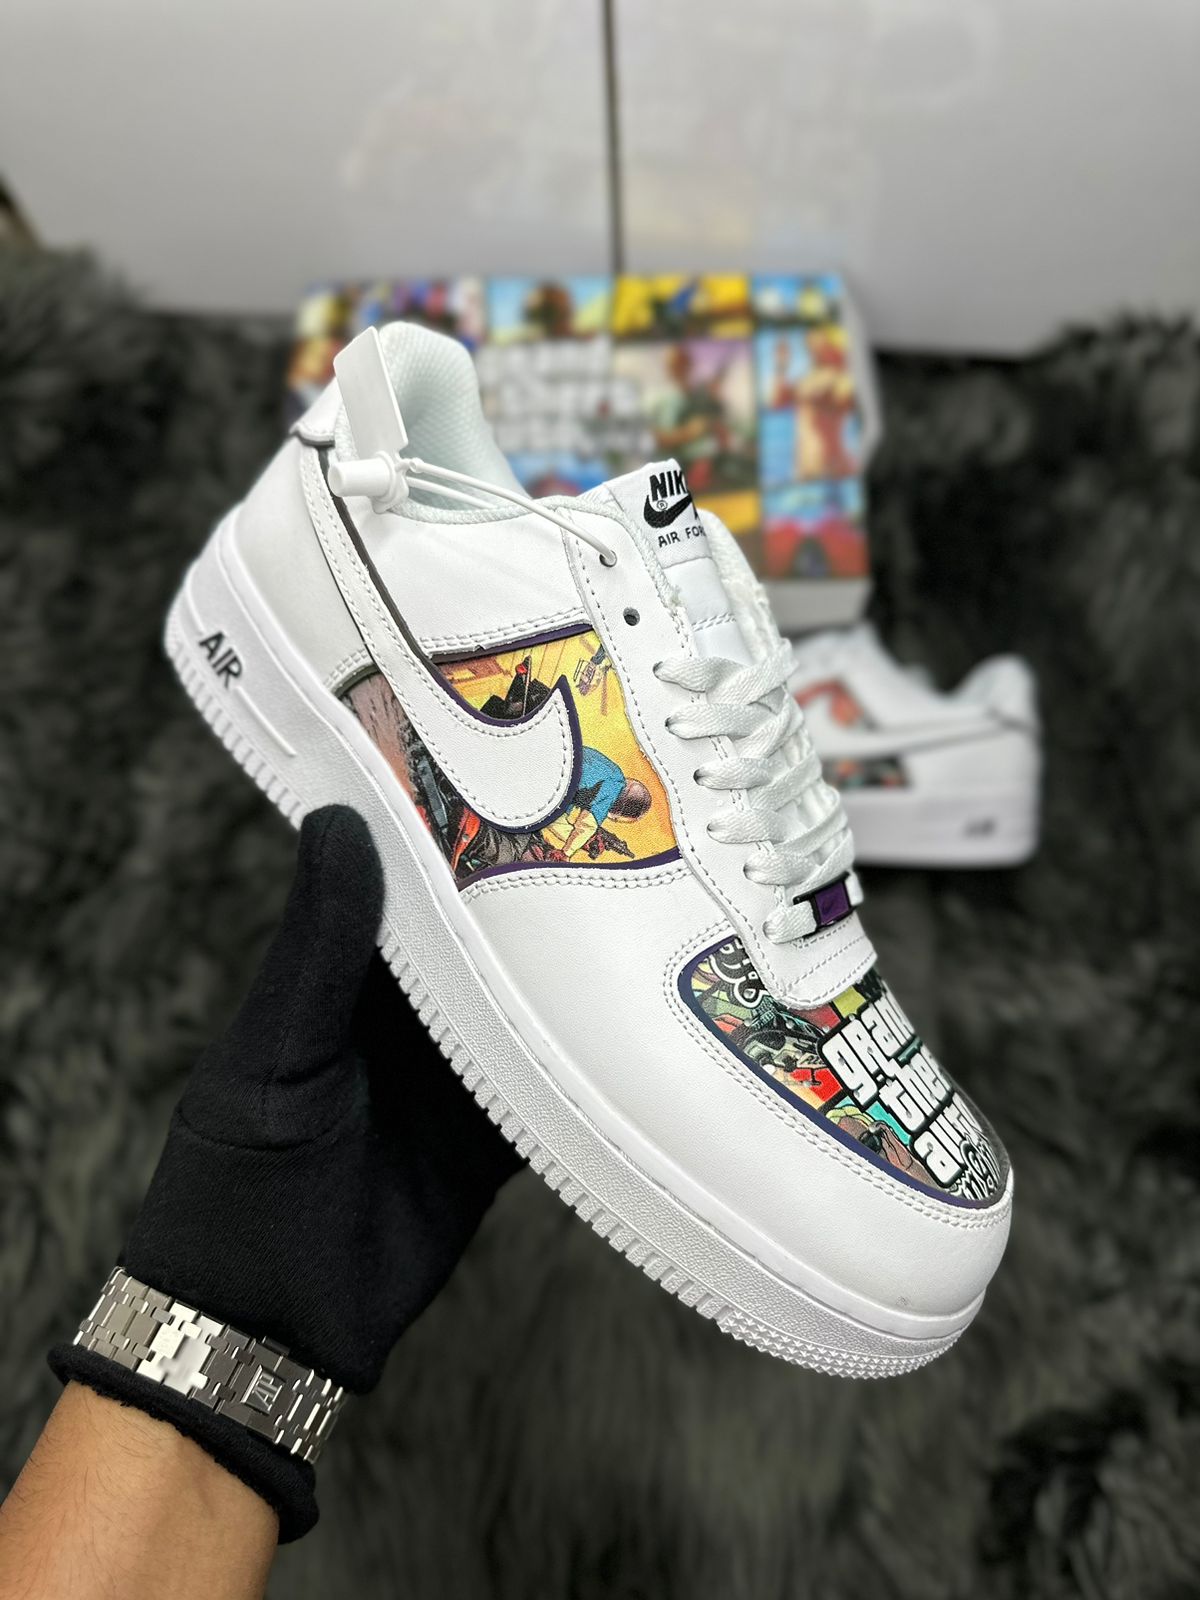 Grand Theft Auto Leather Sneaker